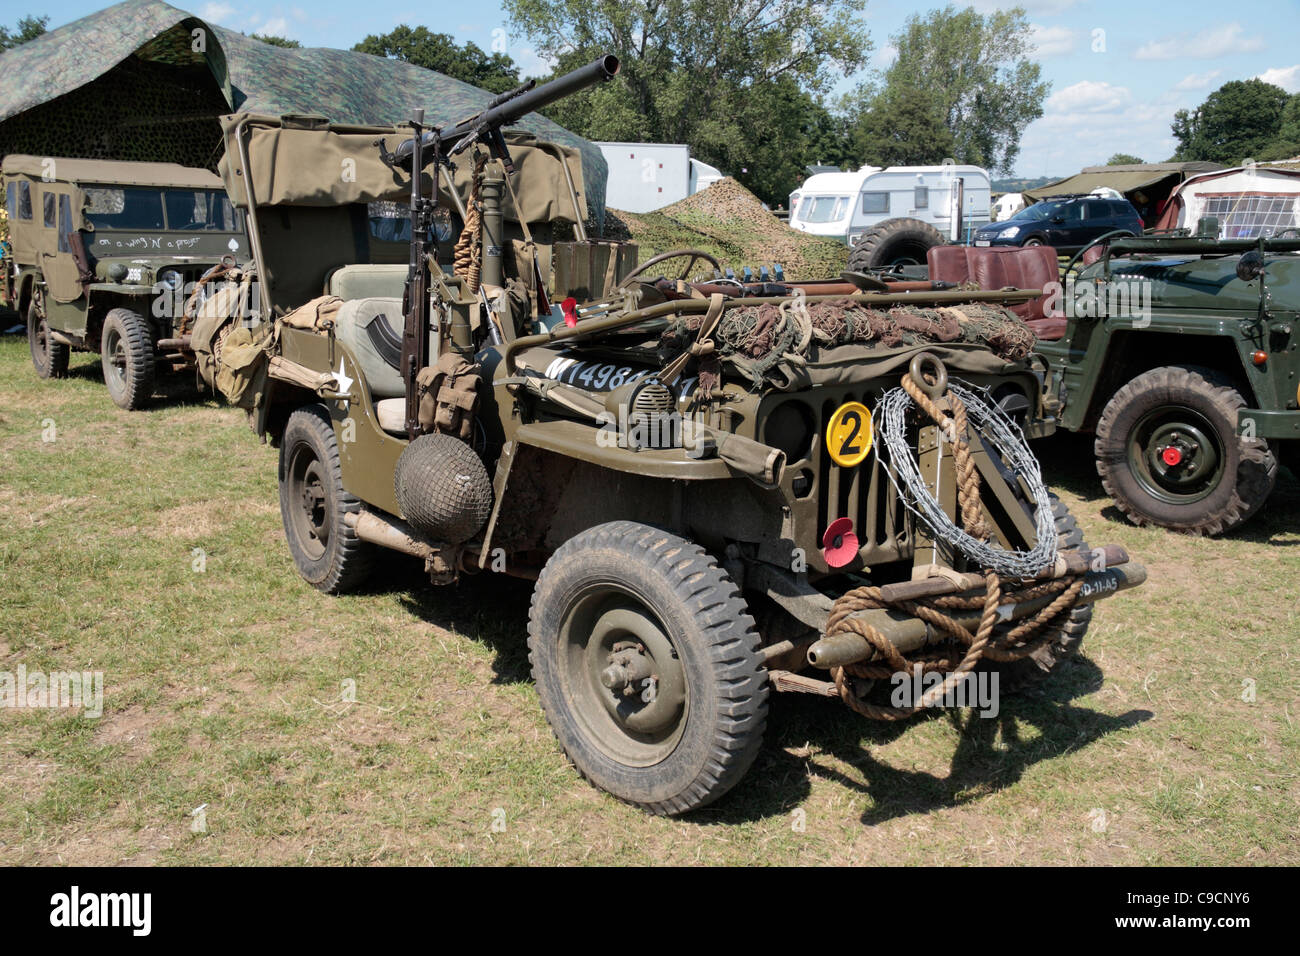 A heavily armed US Army jeep on display at the 2011 War & Peace Show at Hop Farm, Paddock Wood, Kent, UK. Stock Photo